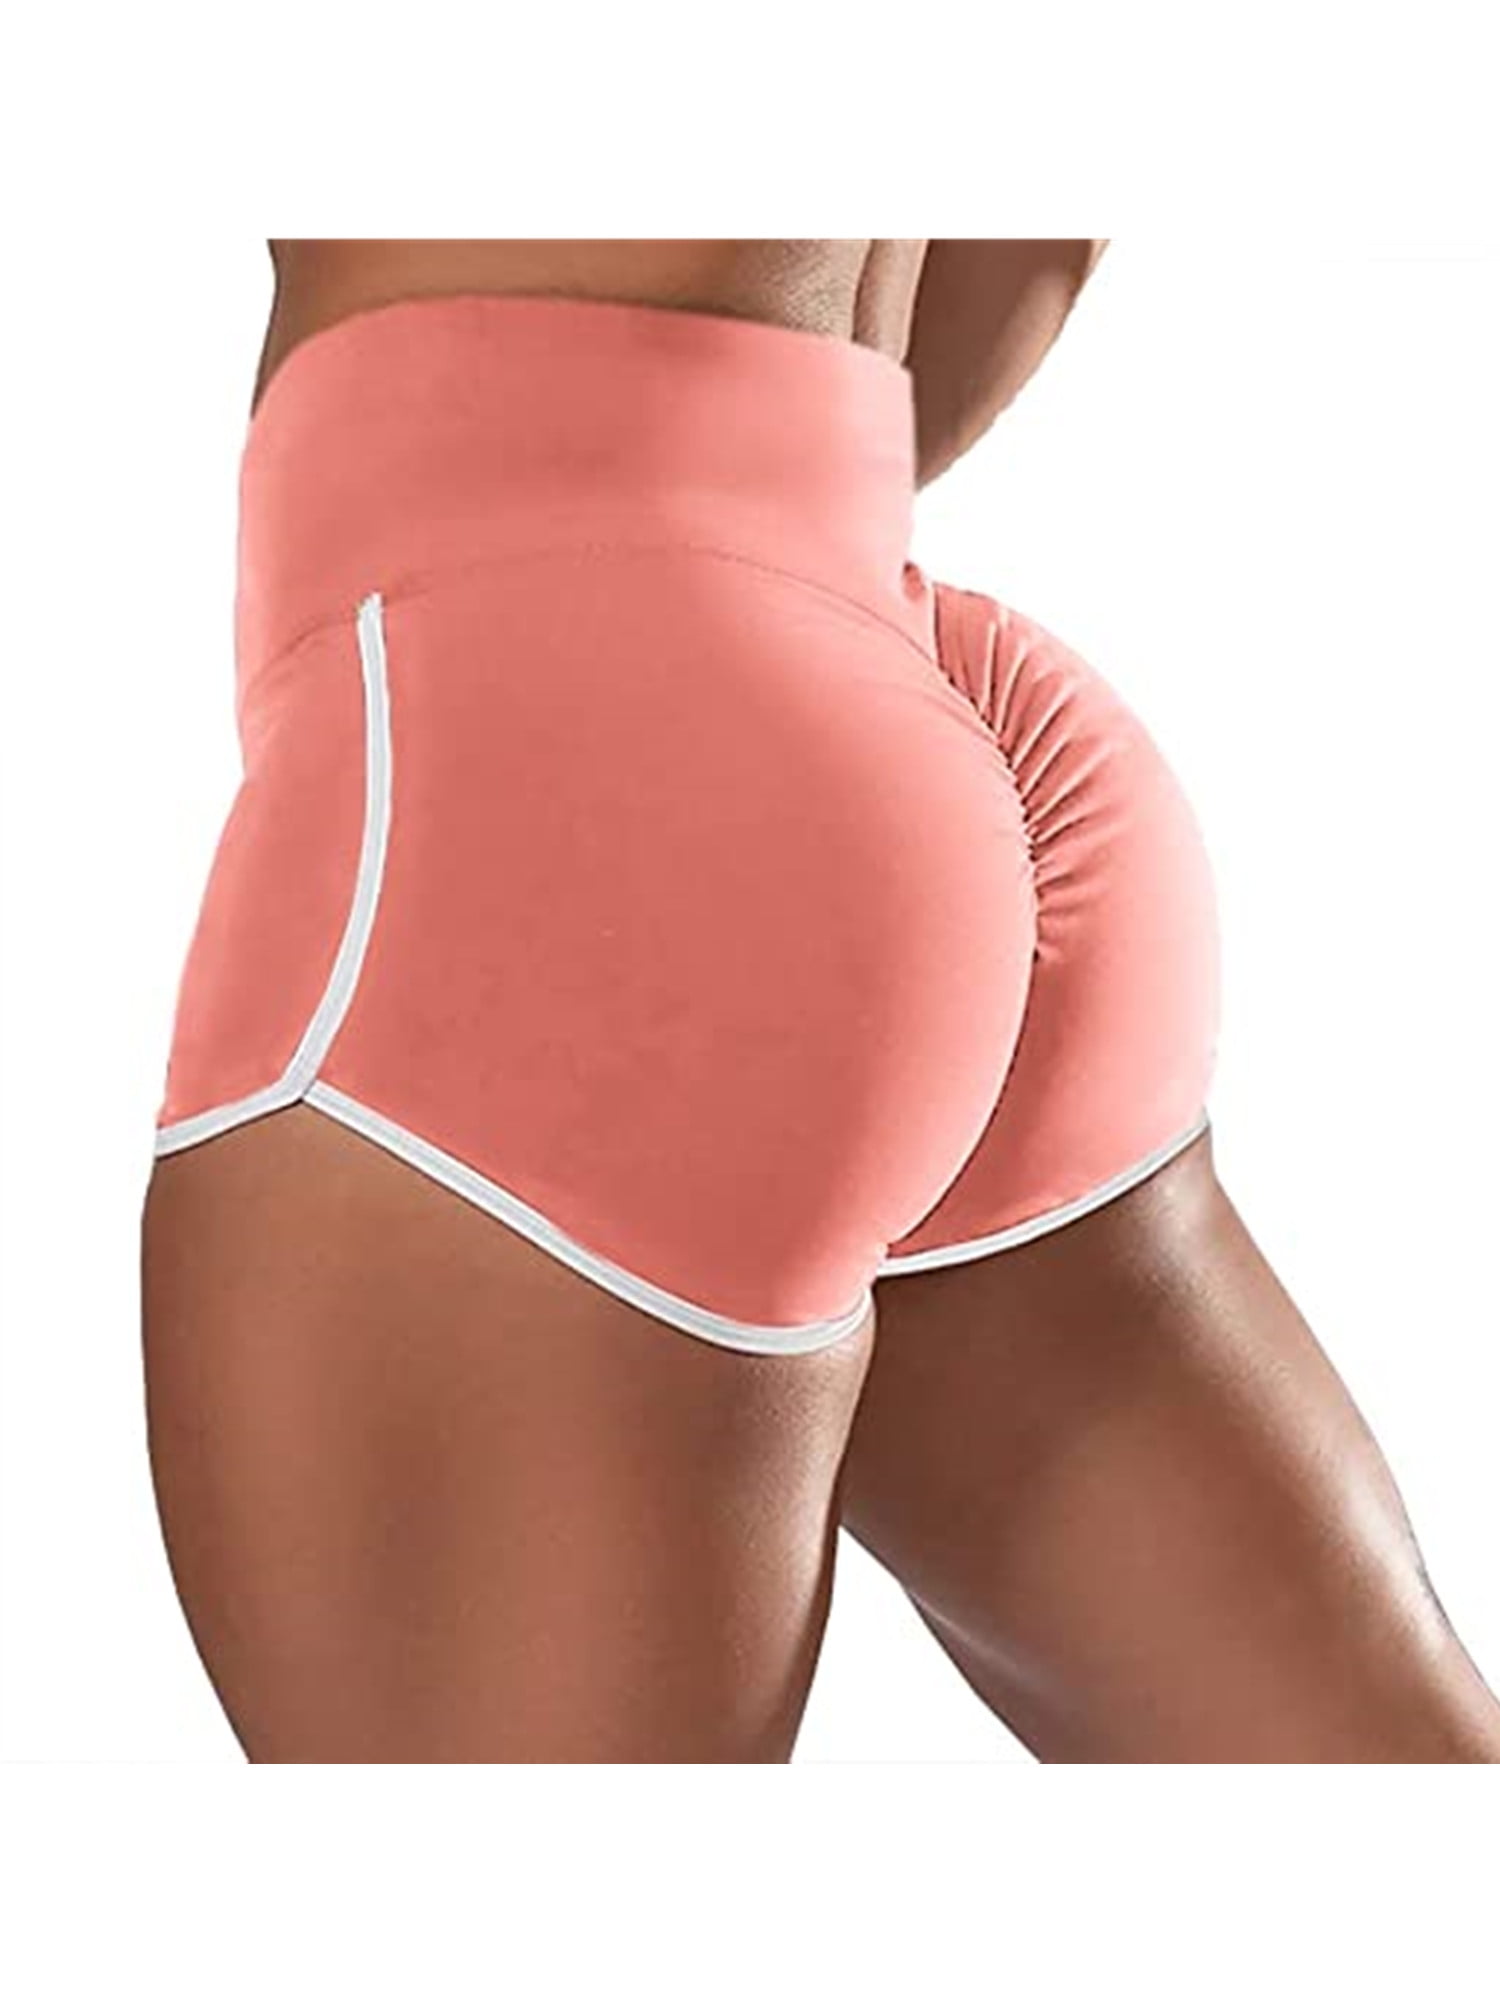 Unthewe Workout Butt Lifting Shorts for Women High Waisted Seamless Gym  Yoga Booty Shorts, Scrunch Hot Pink, M price in UAE,  UAE